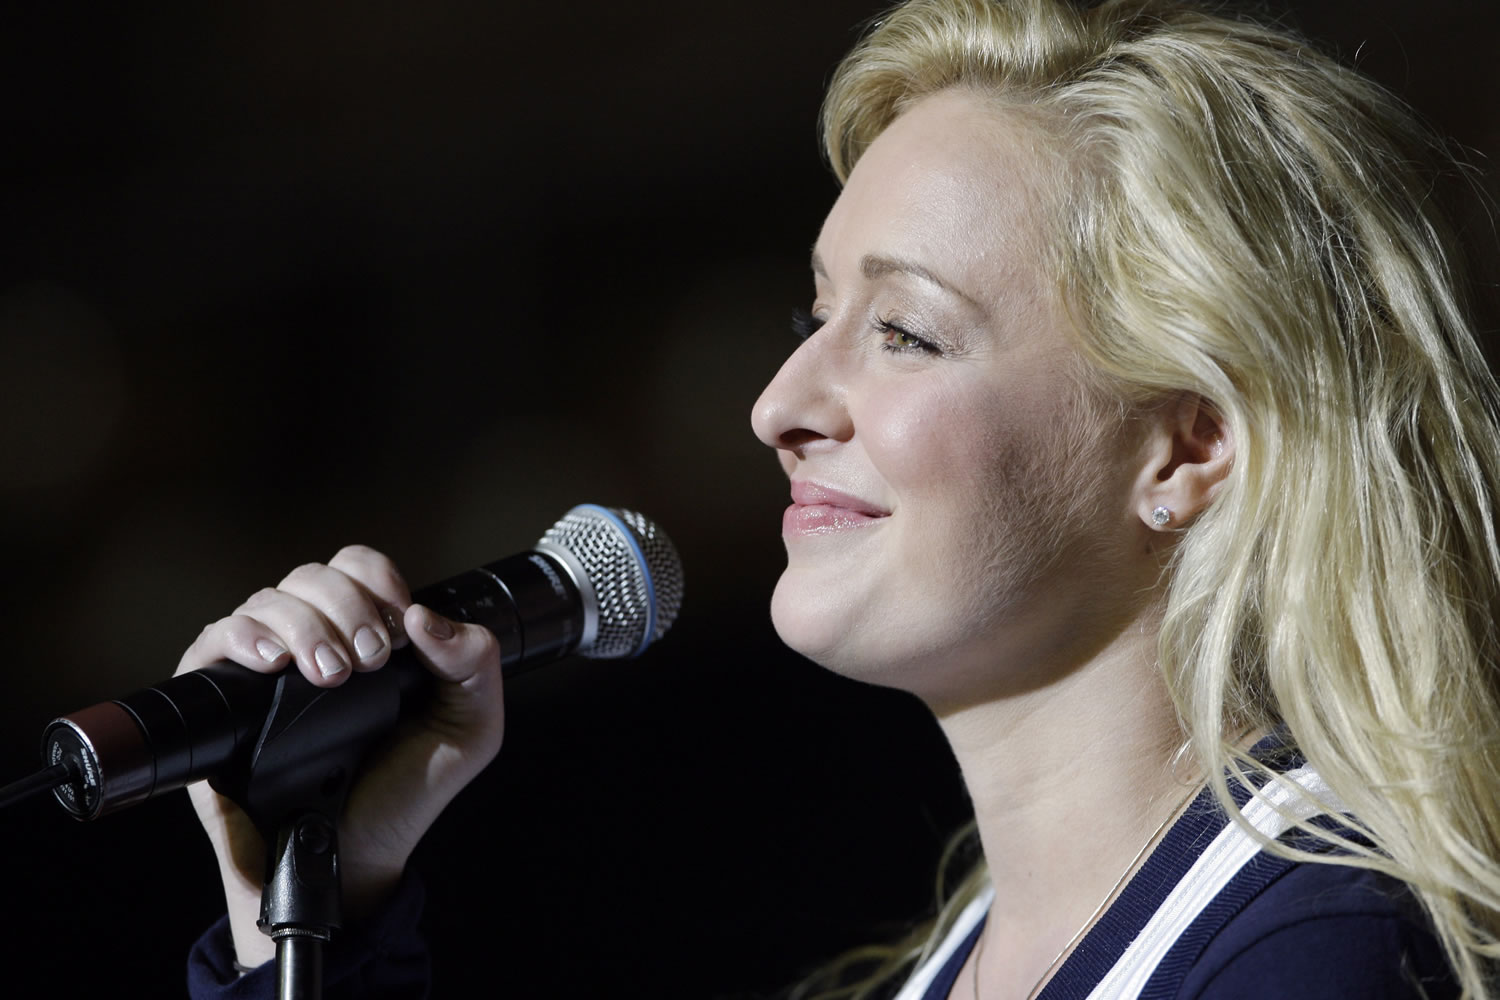 Mindy McCready, who hit the top of the country charts before personal problems sidetracked her career, died Sunday.